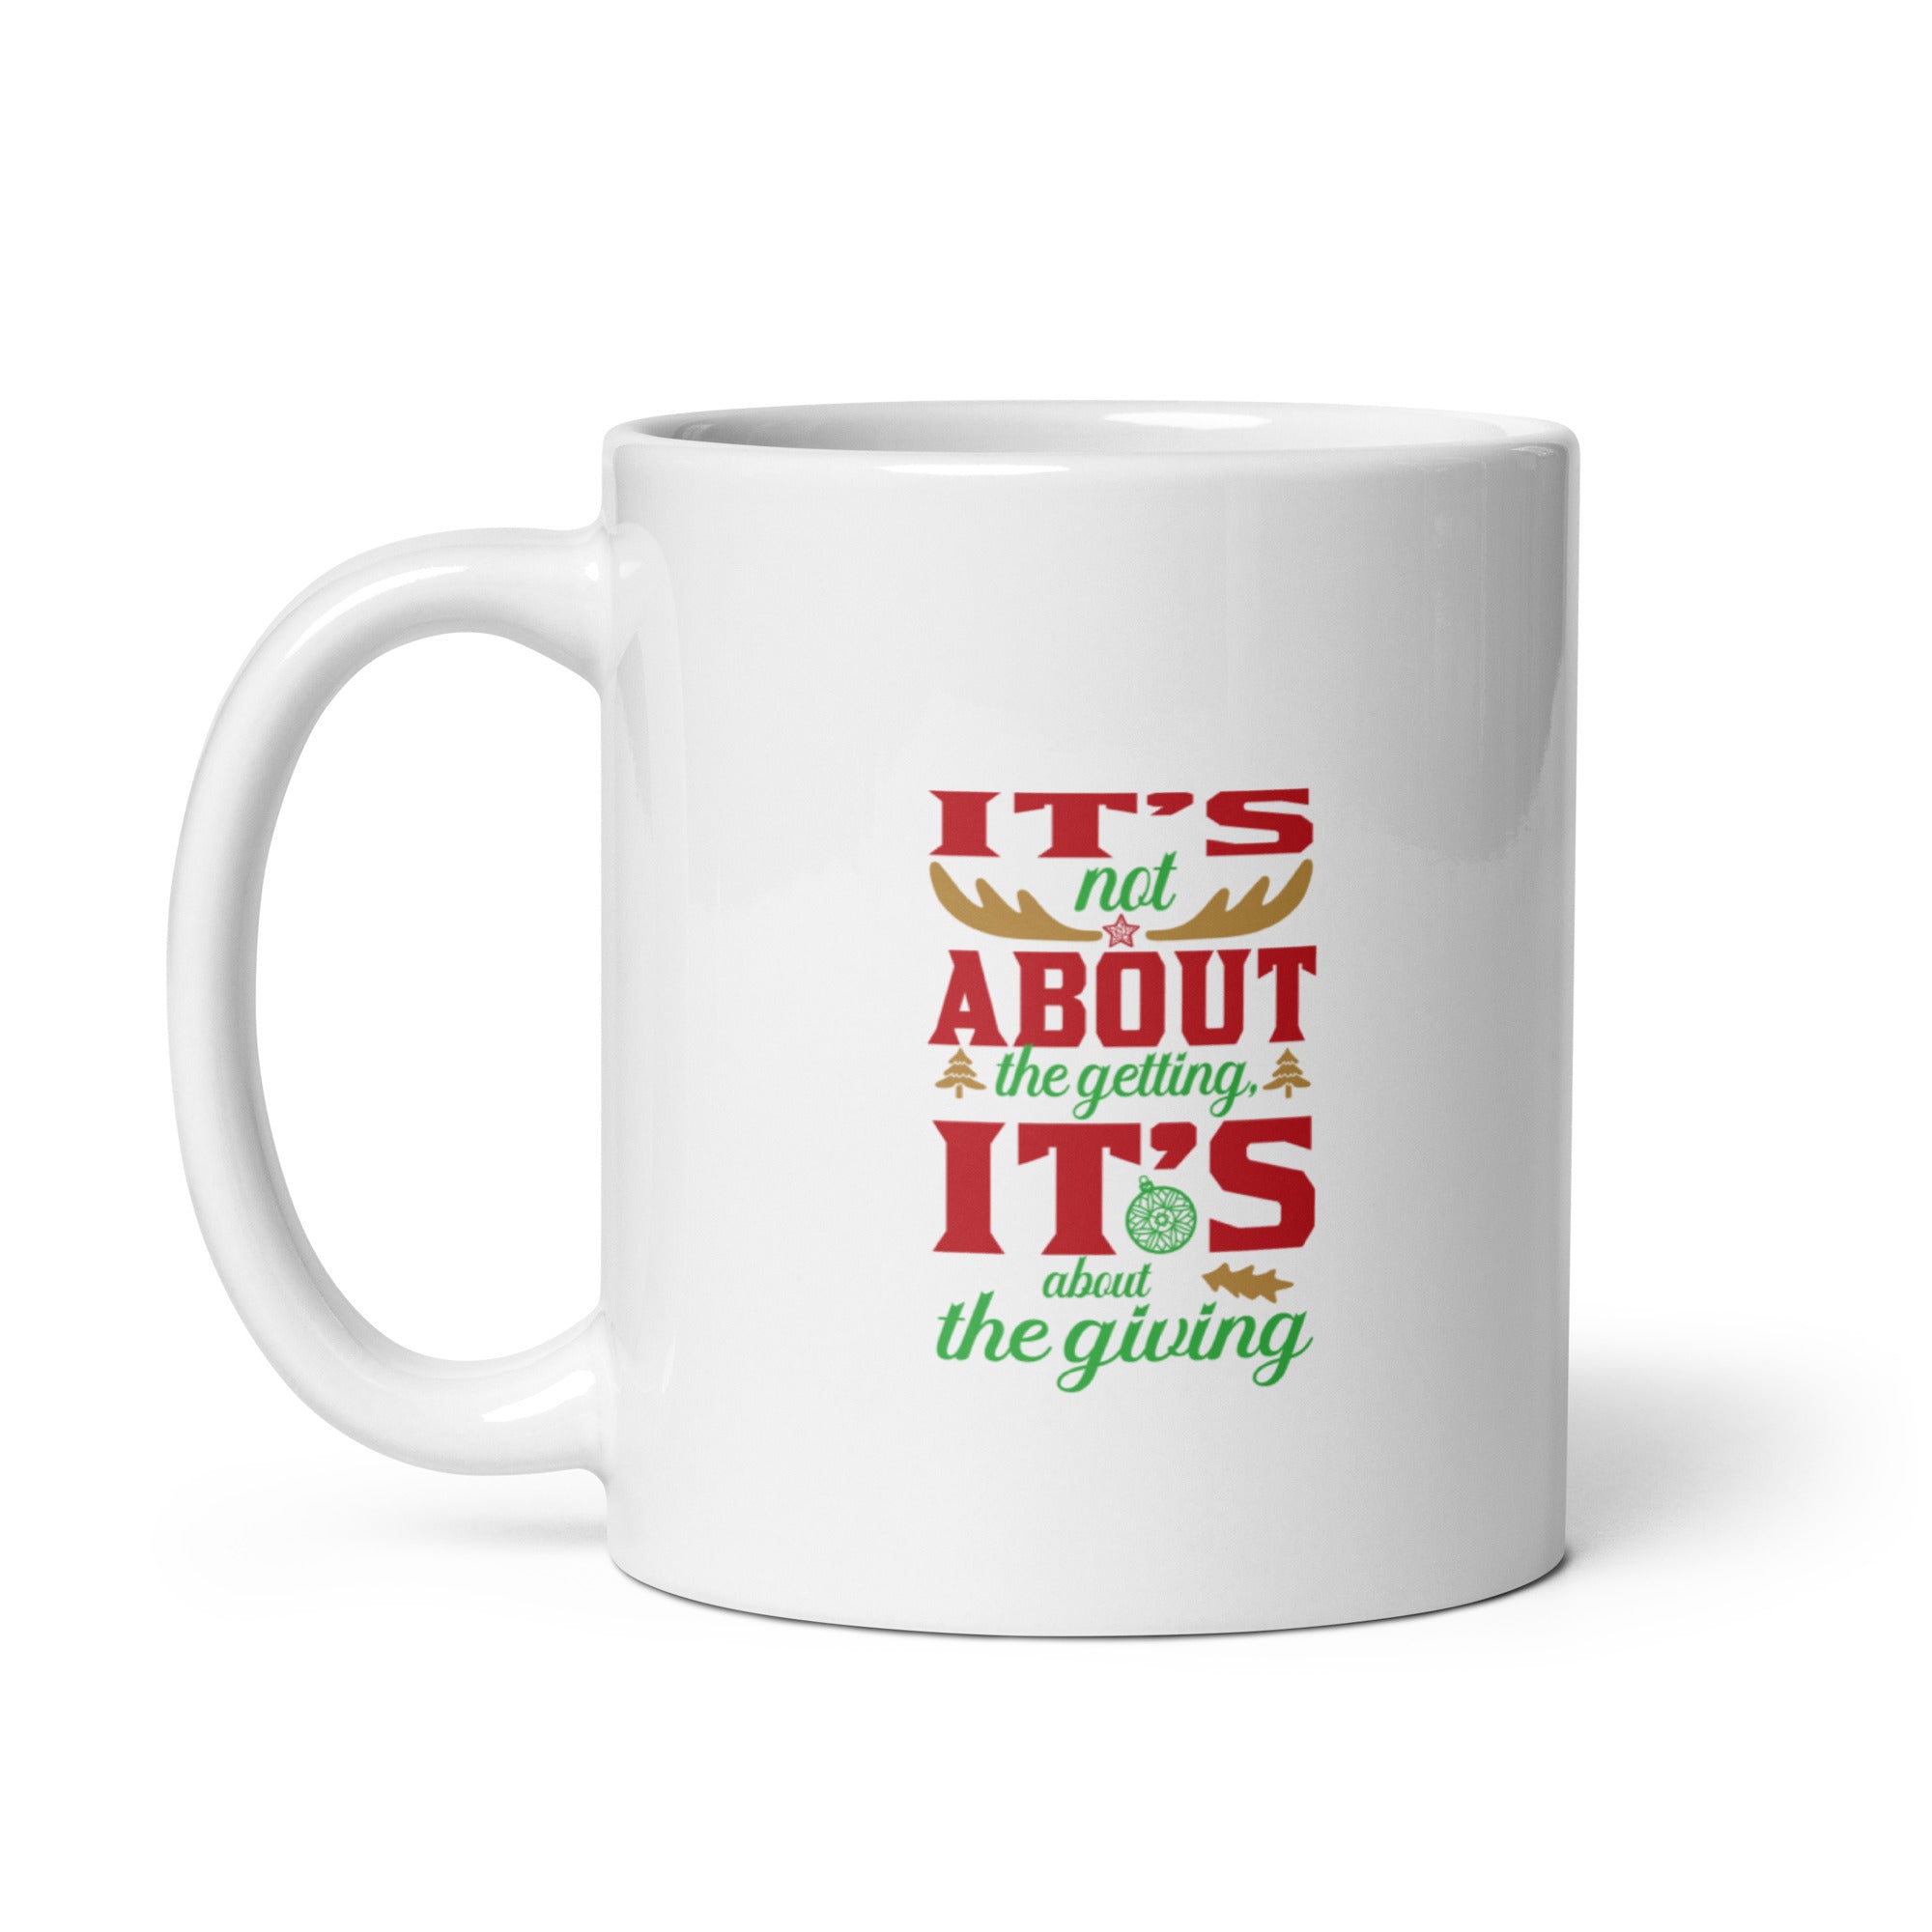 It's About The Giving - White glossy mug